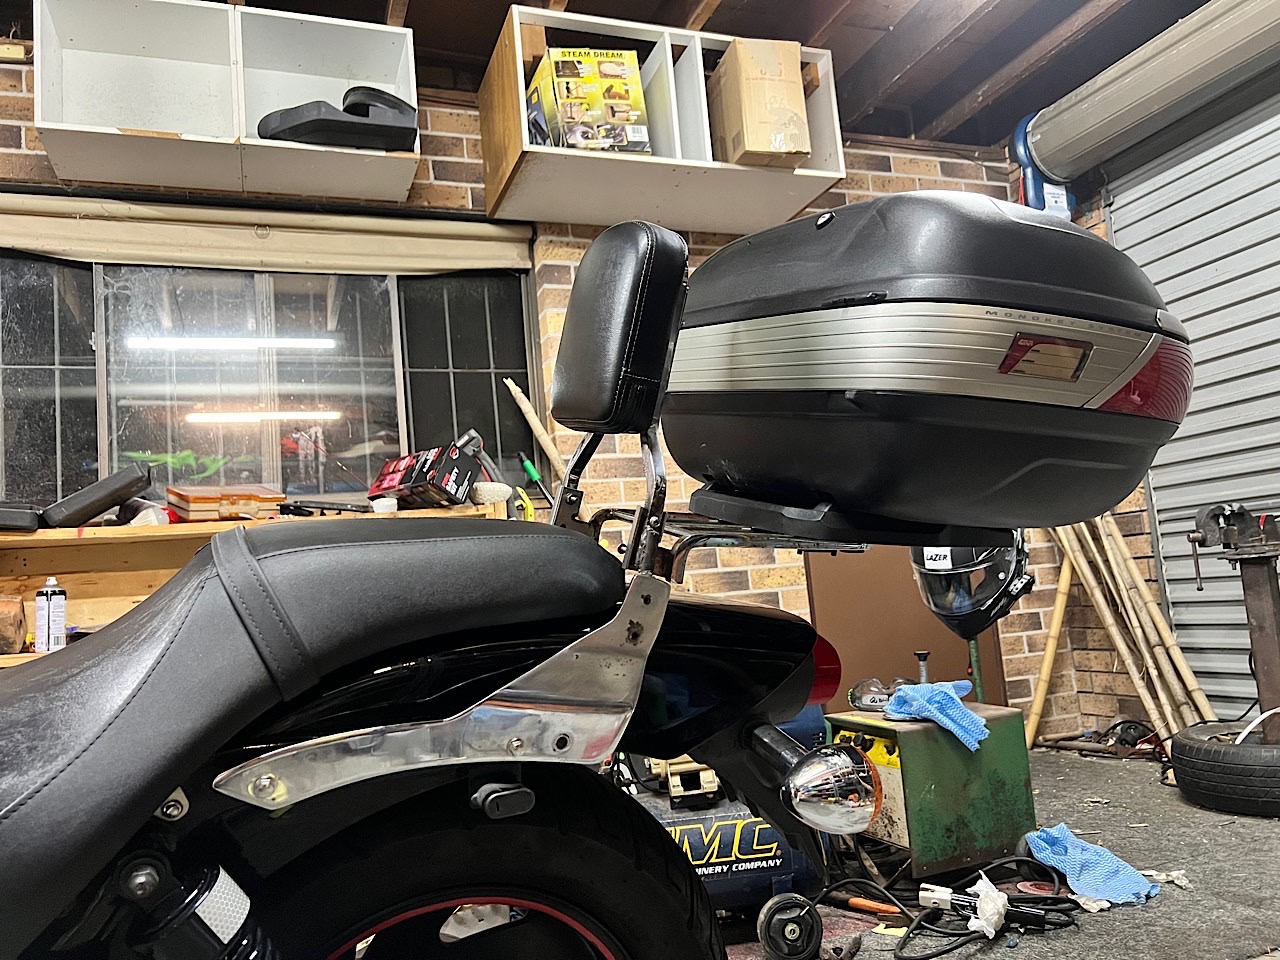 Givi top box on a modified sissy bar